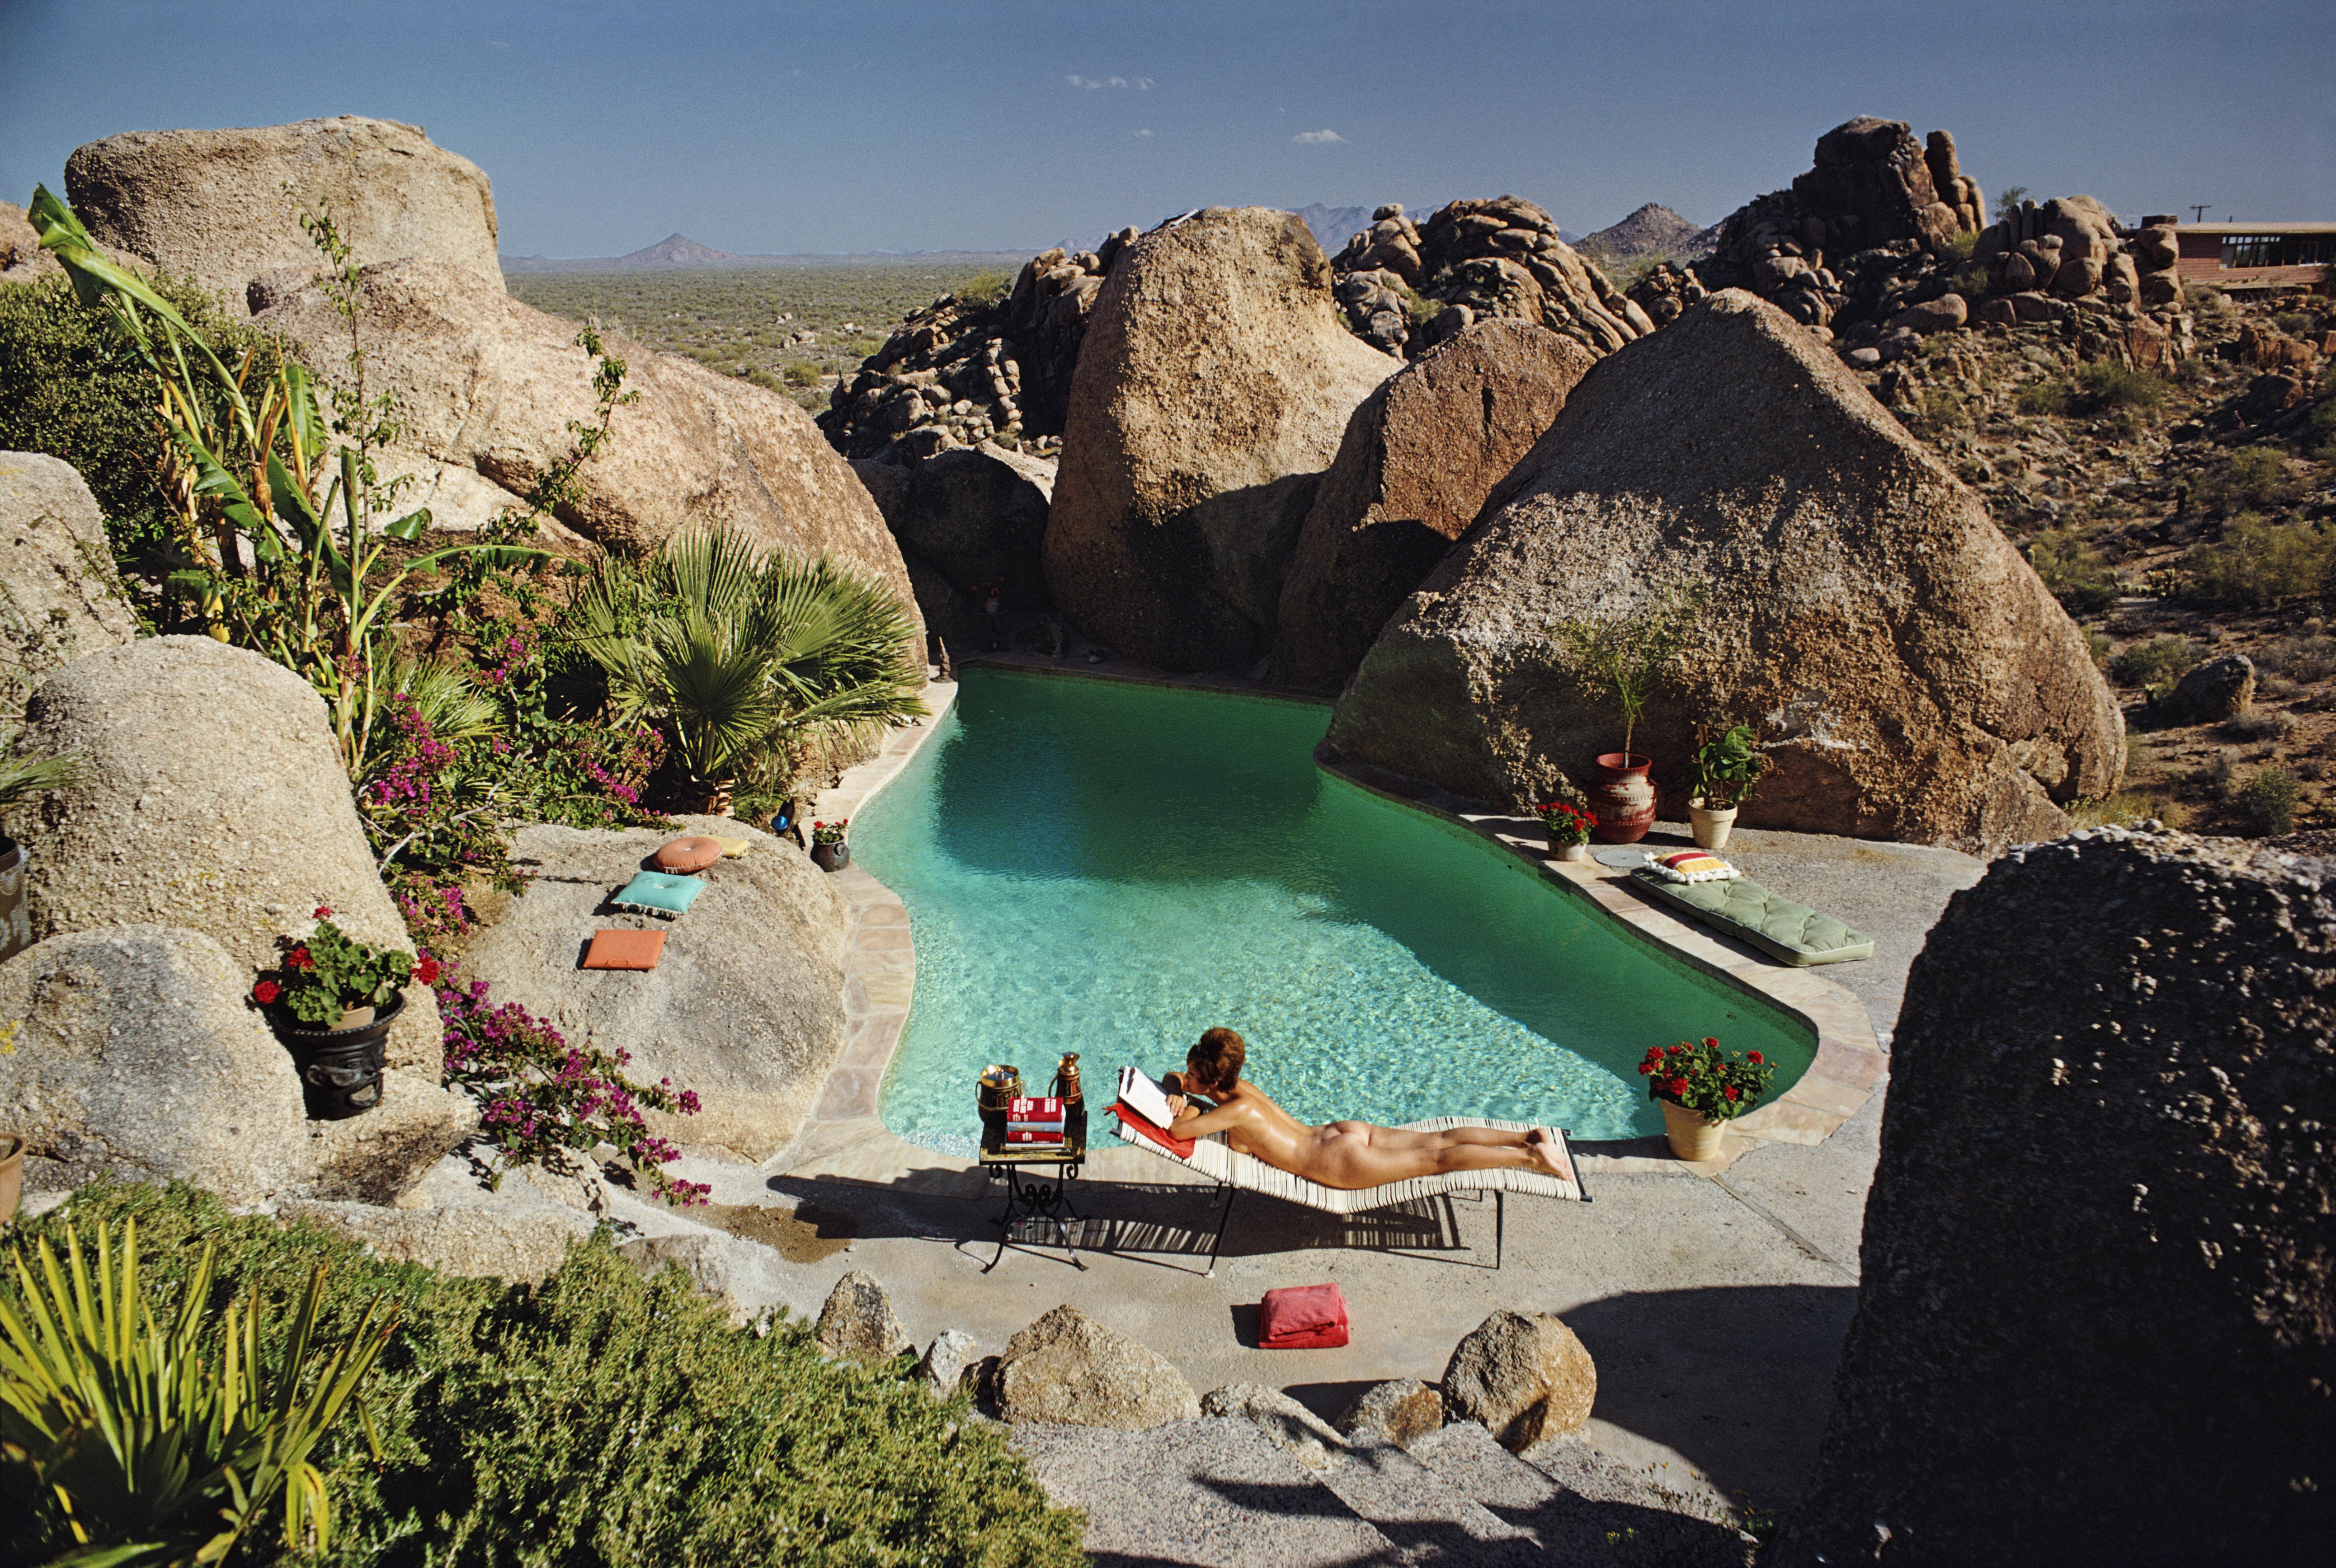 'Sunbathing In Arizona' 1967 Slim Aarons Limited Estate Edition Print 

A woman sunbathing nude by Tom Darlington's pool in Carefree, Arizona, April 1967. 

Produced from the original transparency
Certificate of authenticity supplied 
Archive